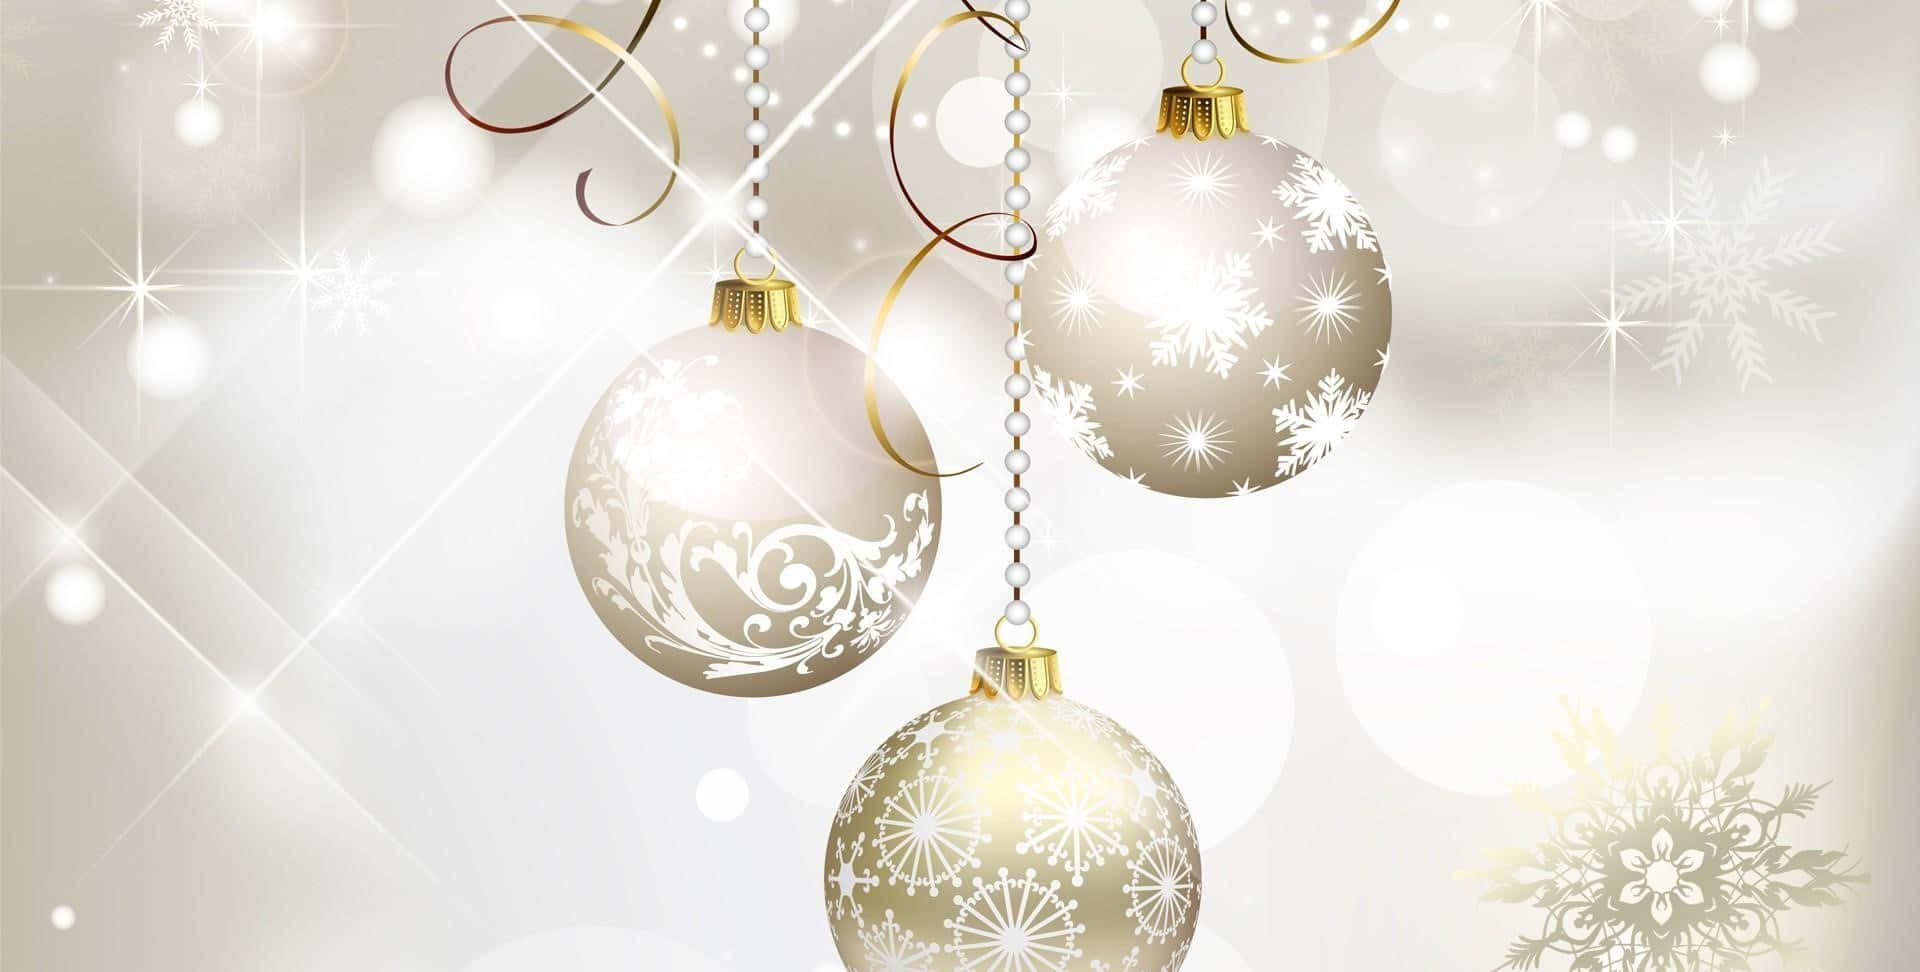 Celebrate the Holidays with Gold Christmas Decor Wallpaper